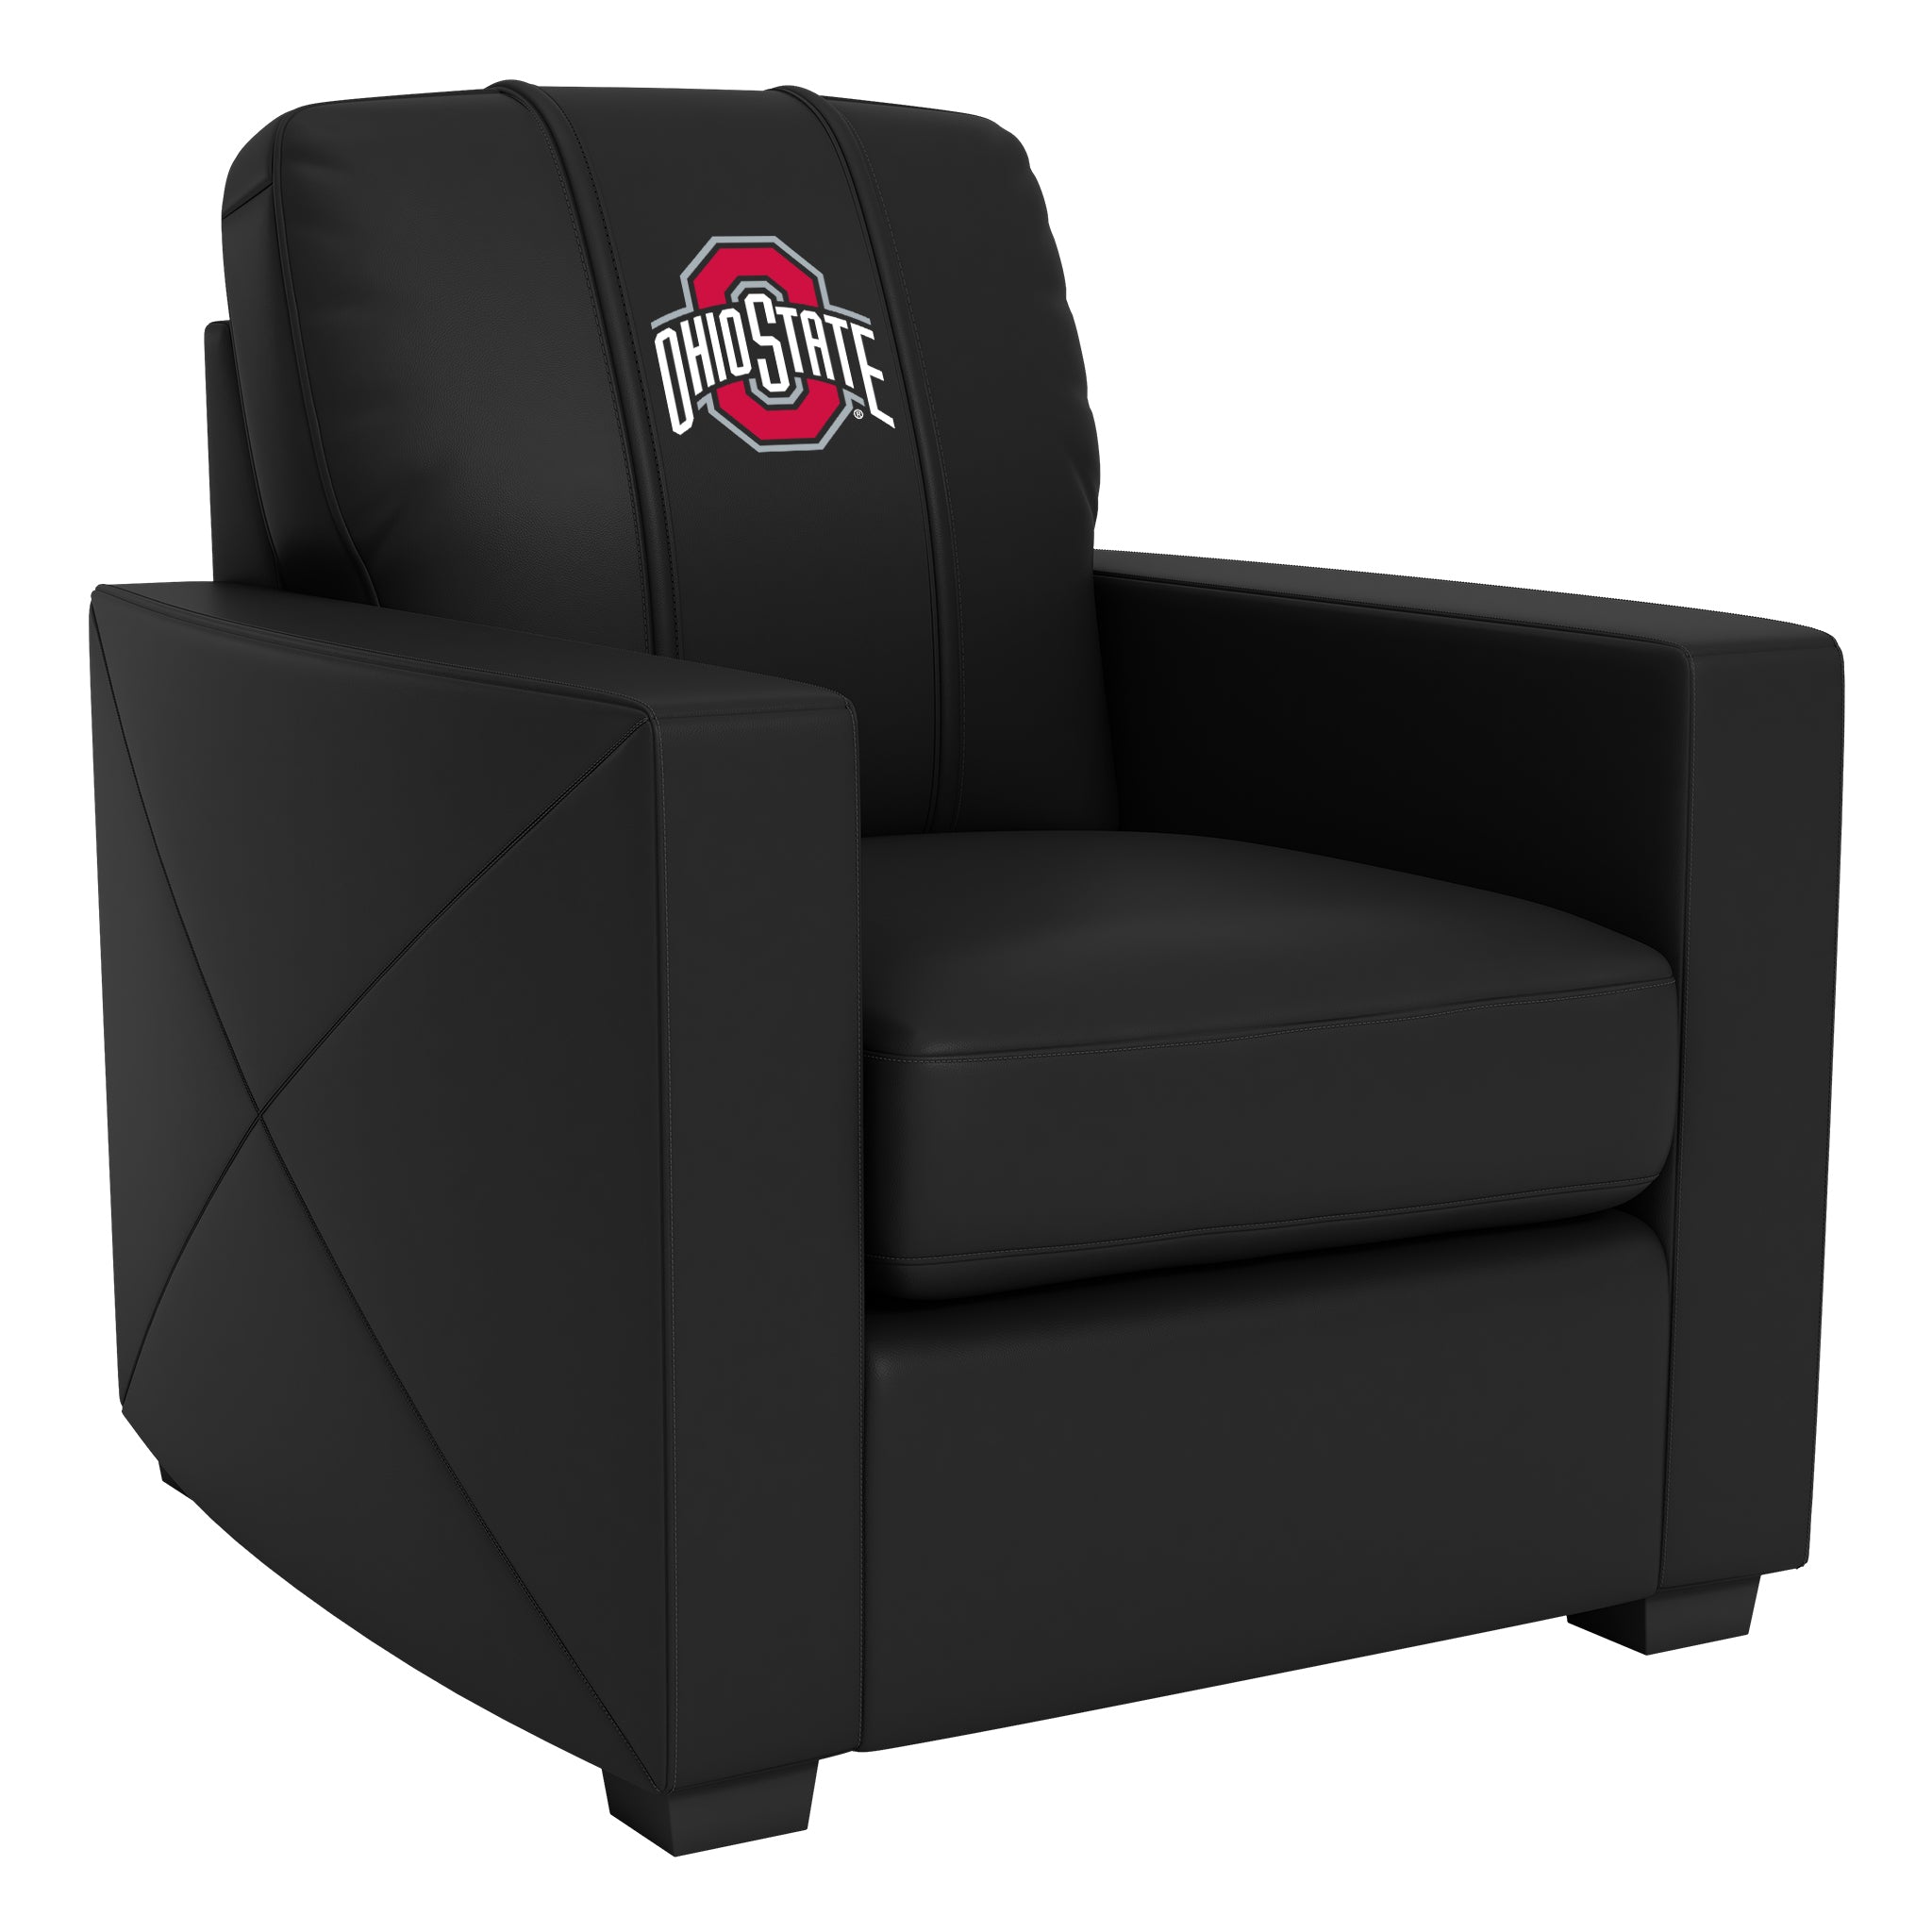 Ohio State Silver Club Chair with Ohio State Primary Logo